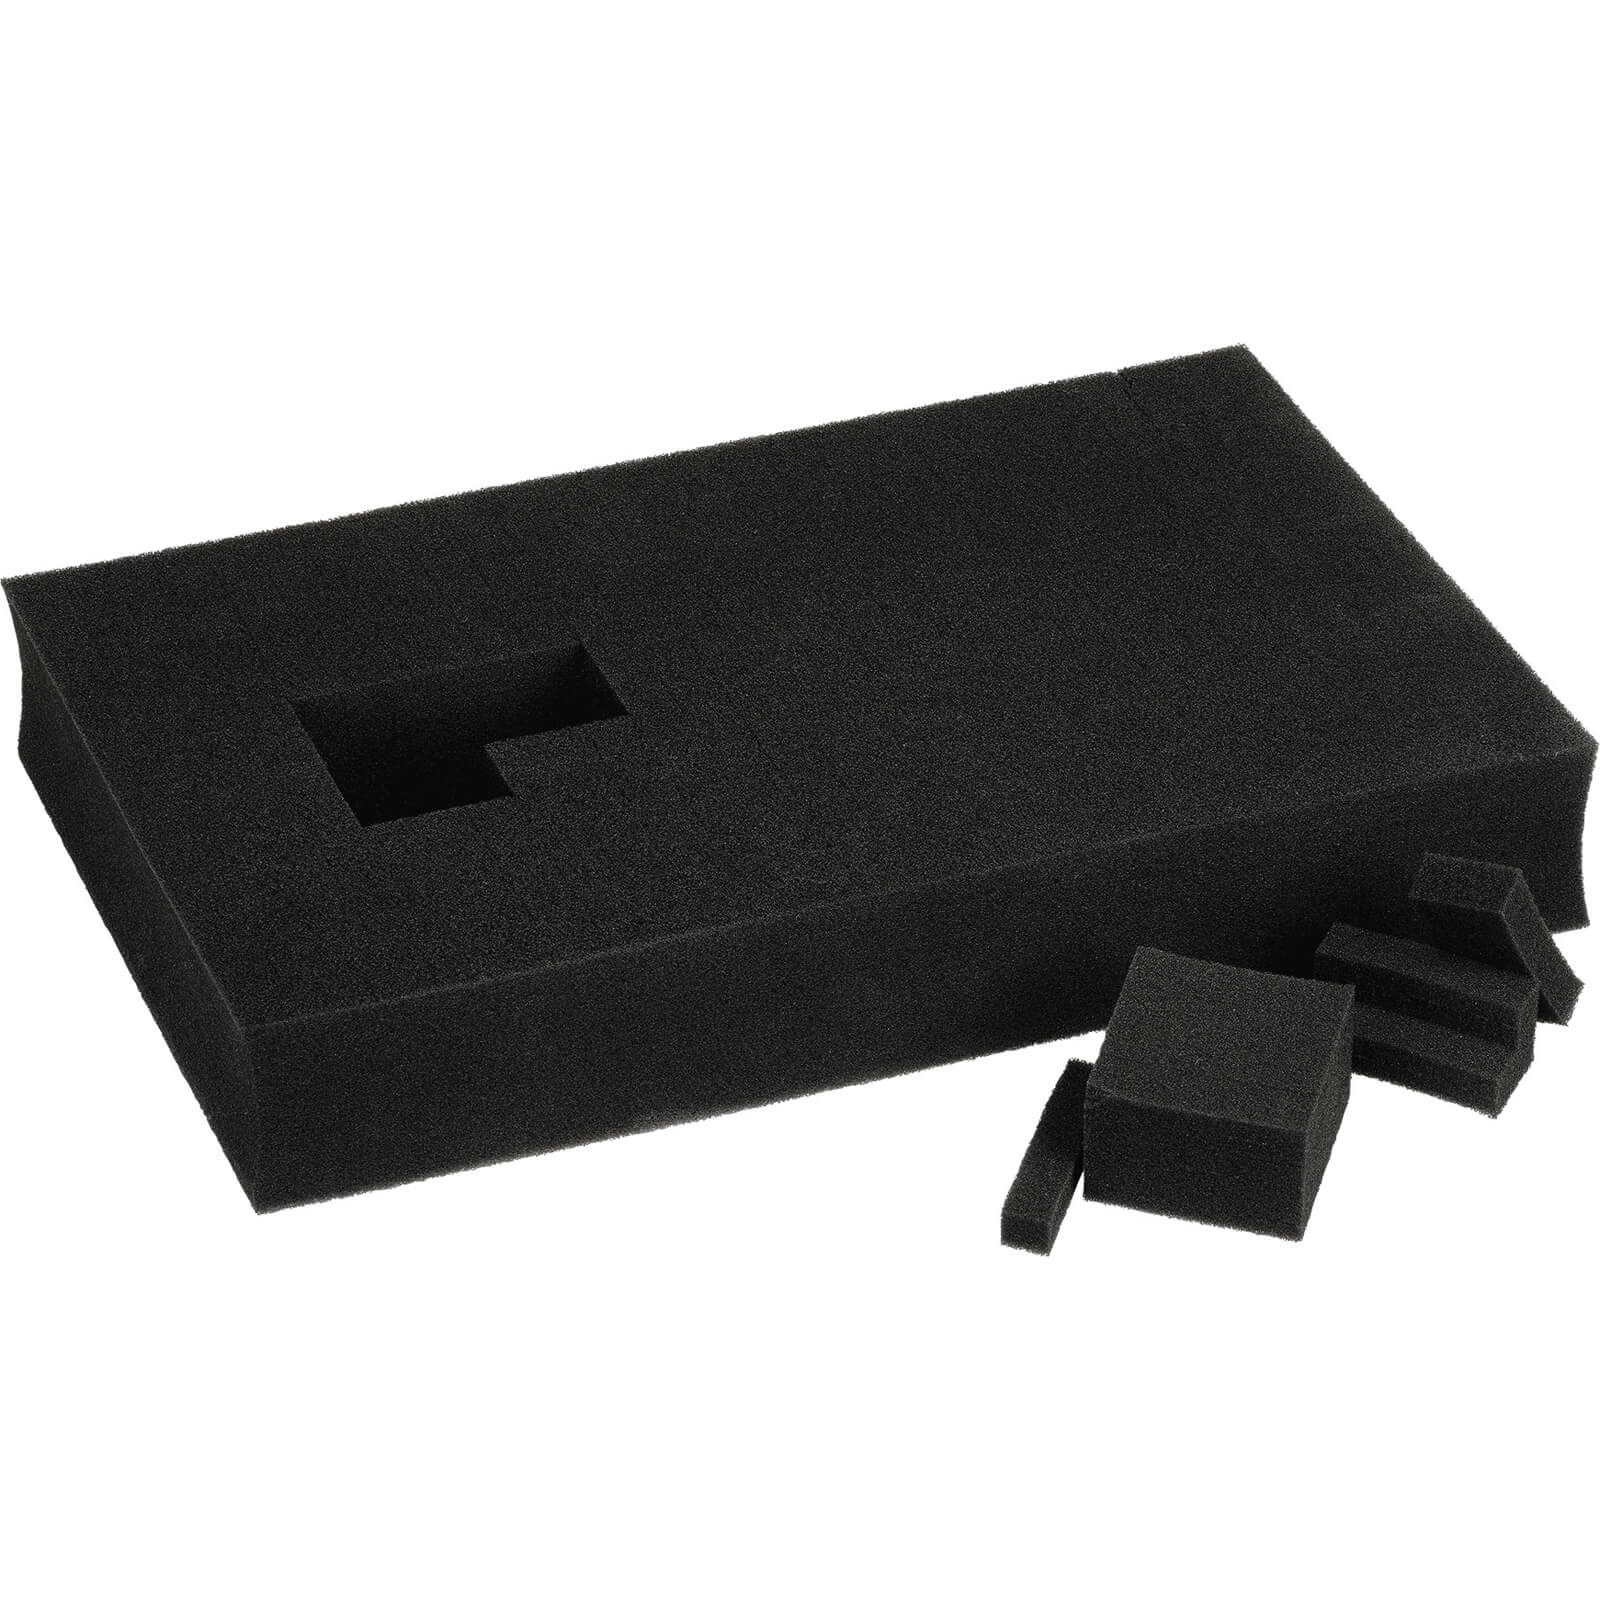 Image of Einhell Foam Insert For Stackable Case